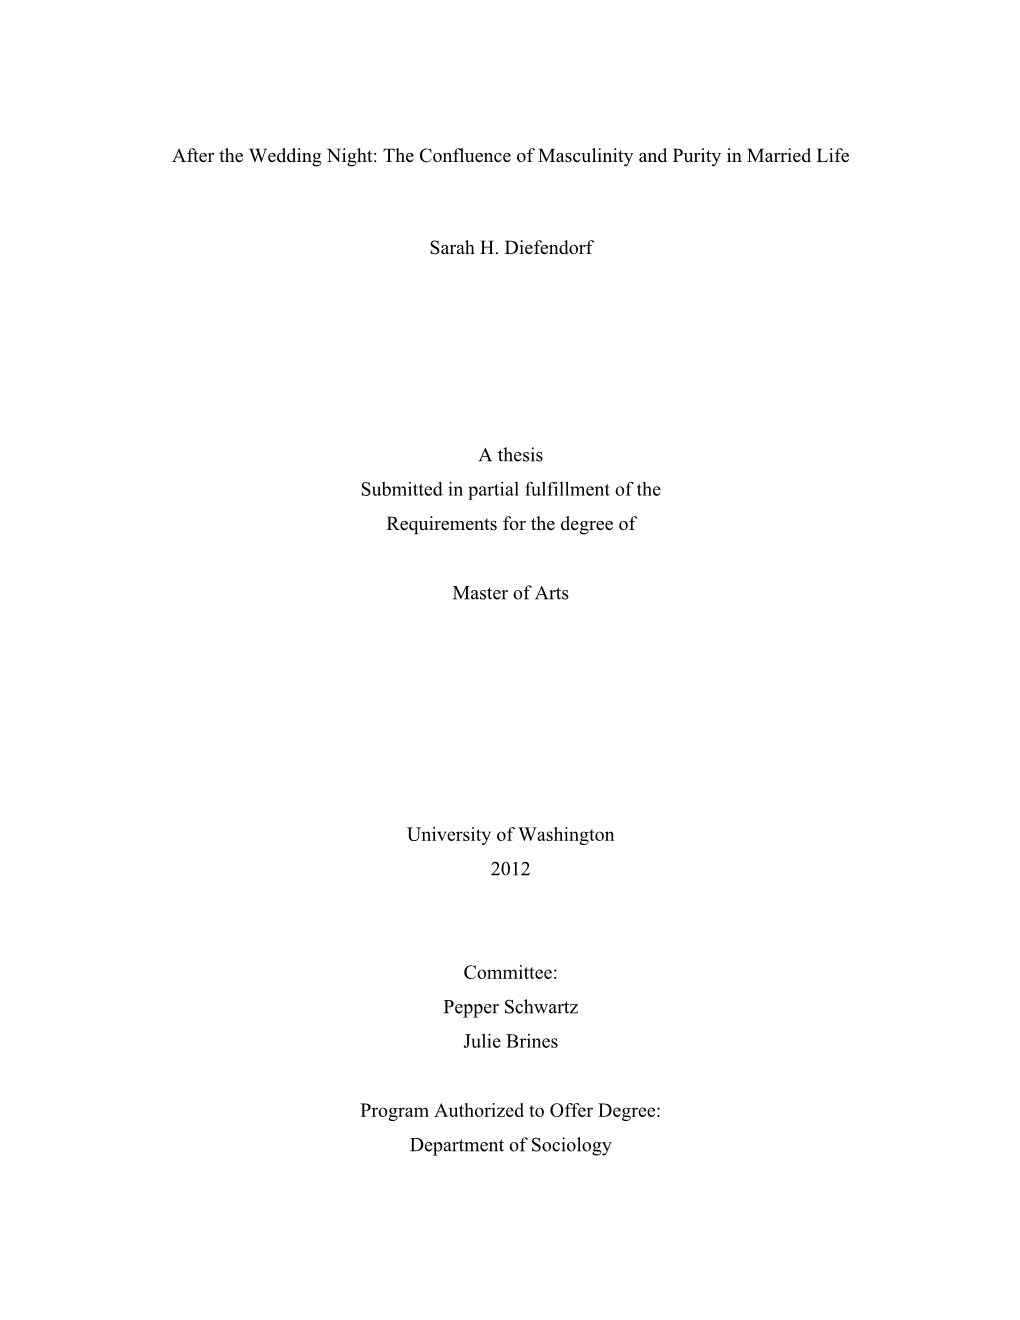 After the Wedding Night: the Confluence of Masculinity and Purity in Married Life Sarah H. Diefendorf a Thesis Submitted in Part